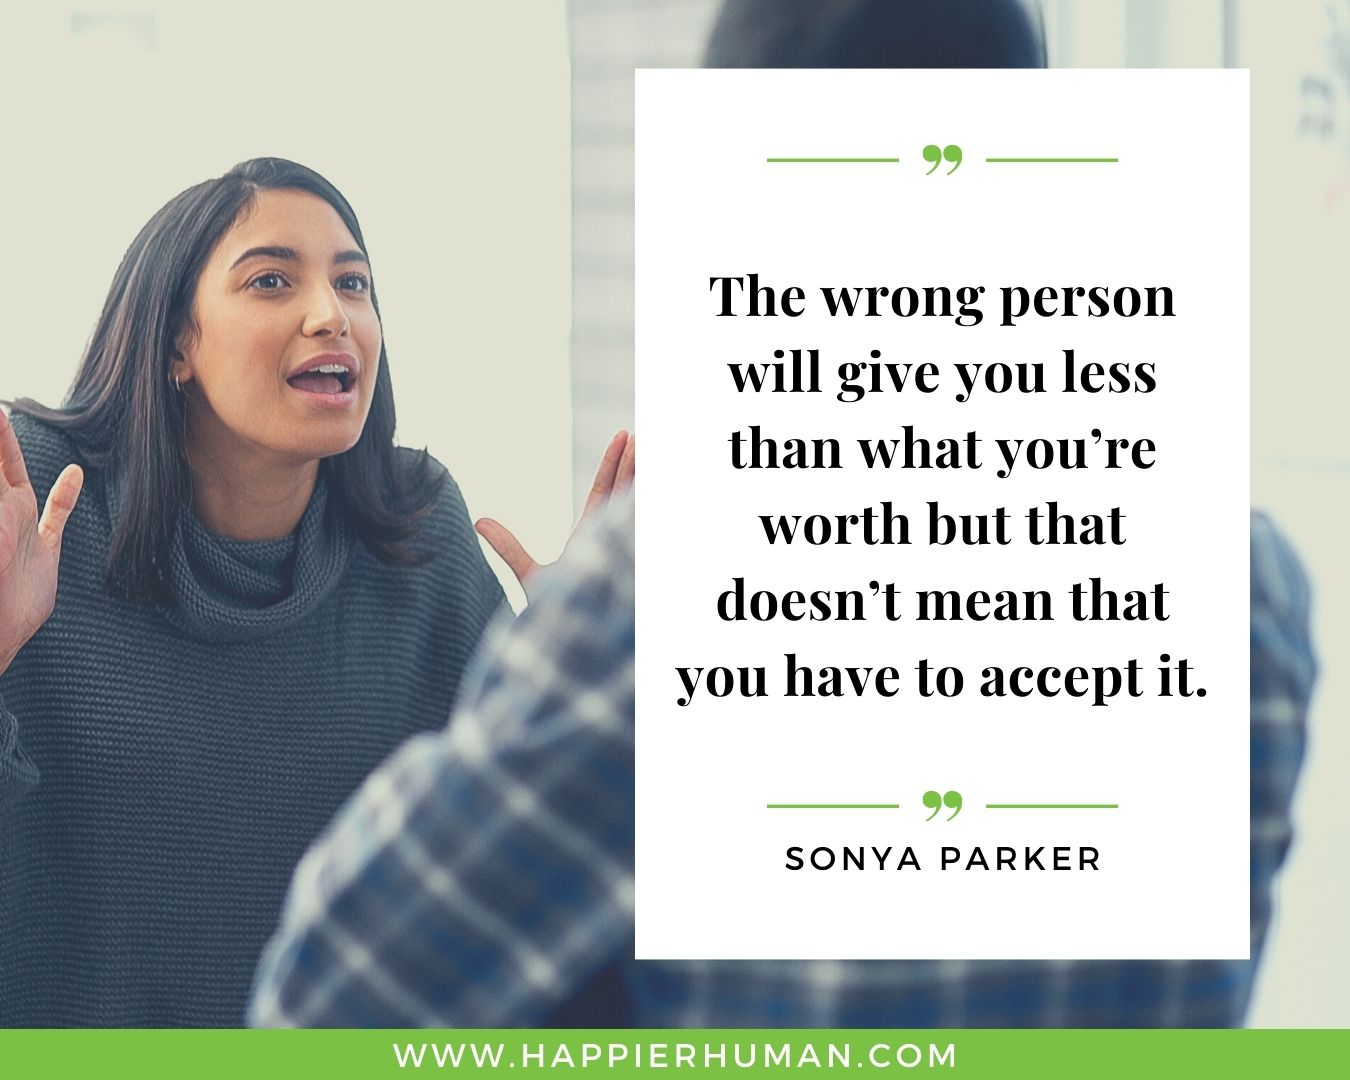 Toxic People Quotes - “The wrong person will give you less than what you’re worth but that doesn’t mean that you have to accept it.” – Sonya Parker